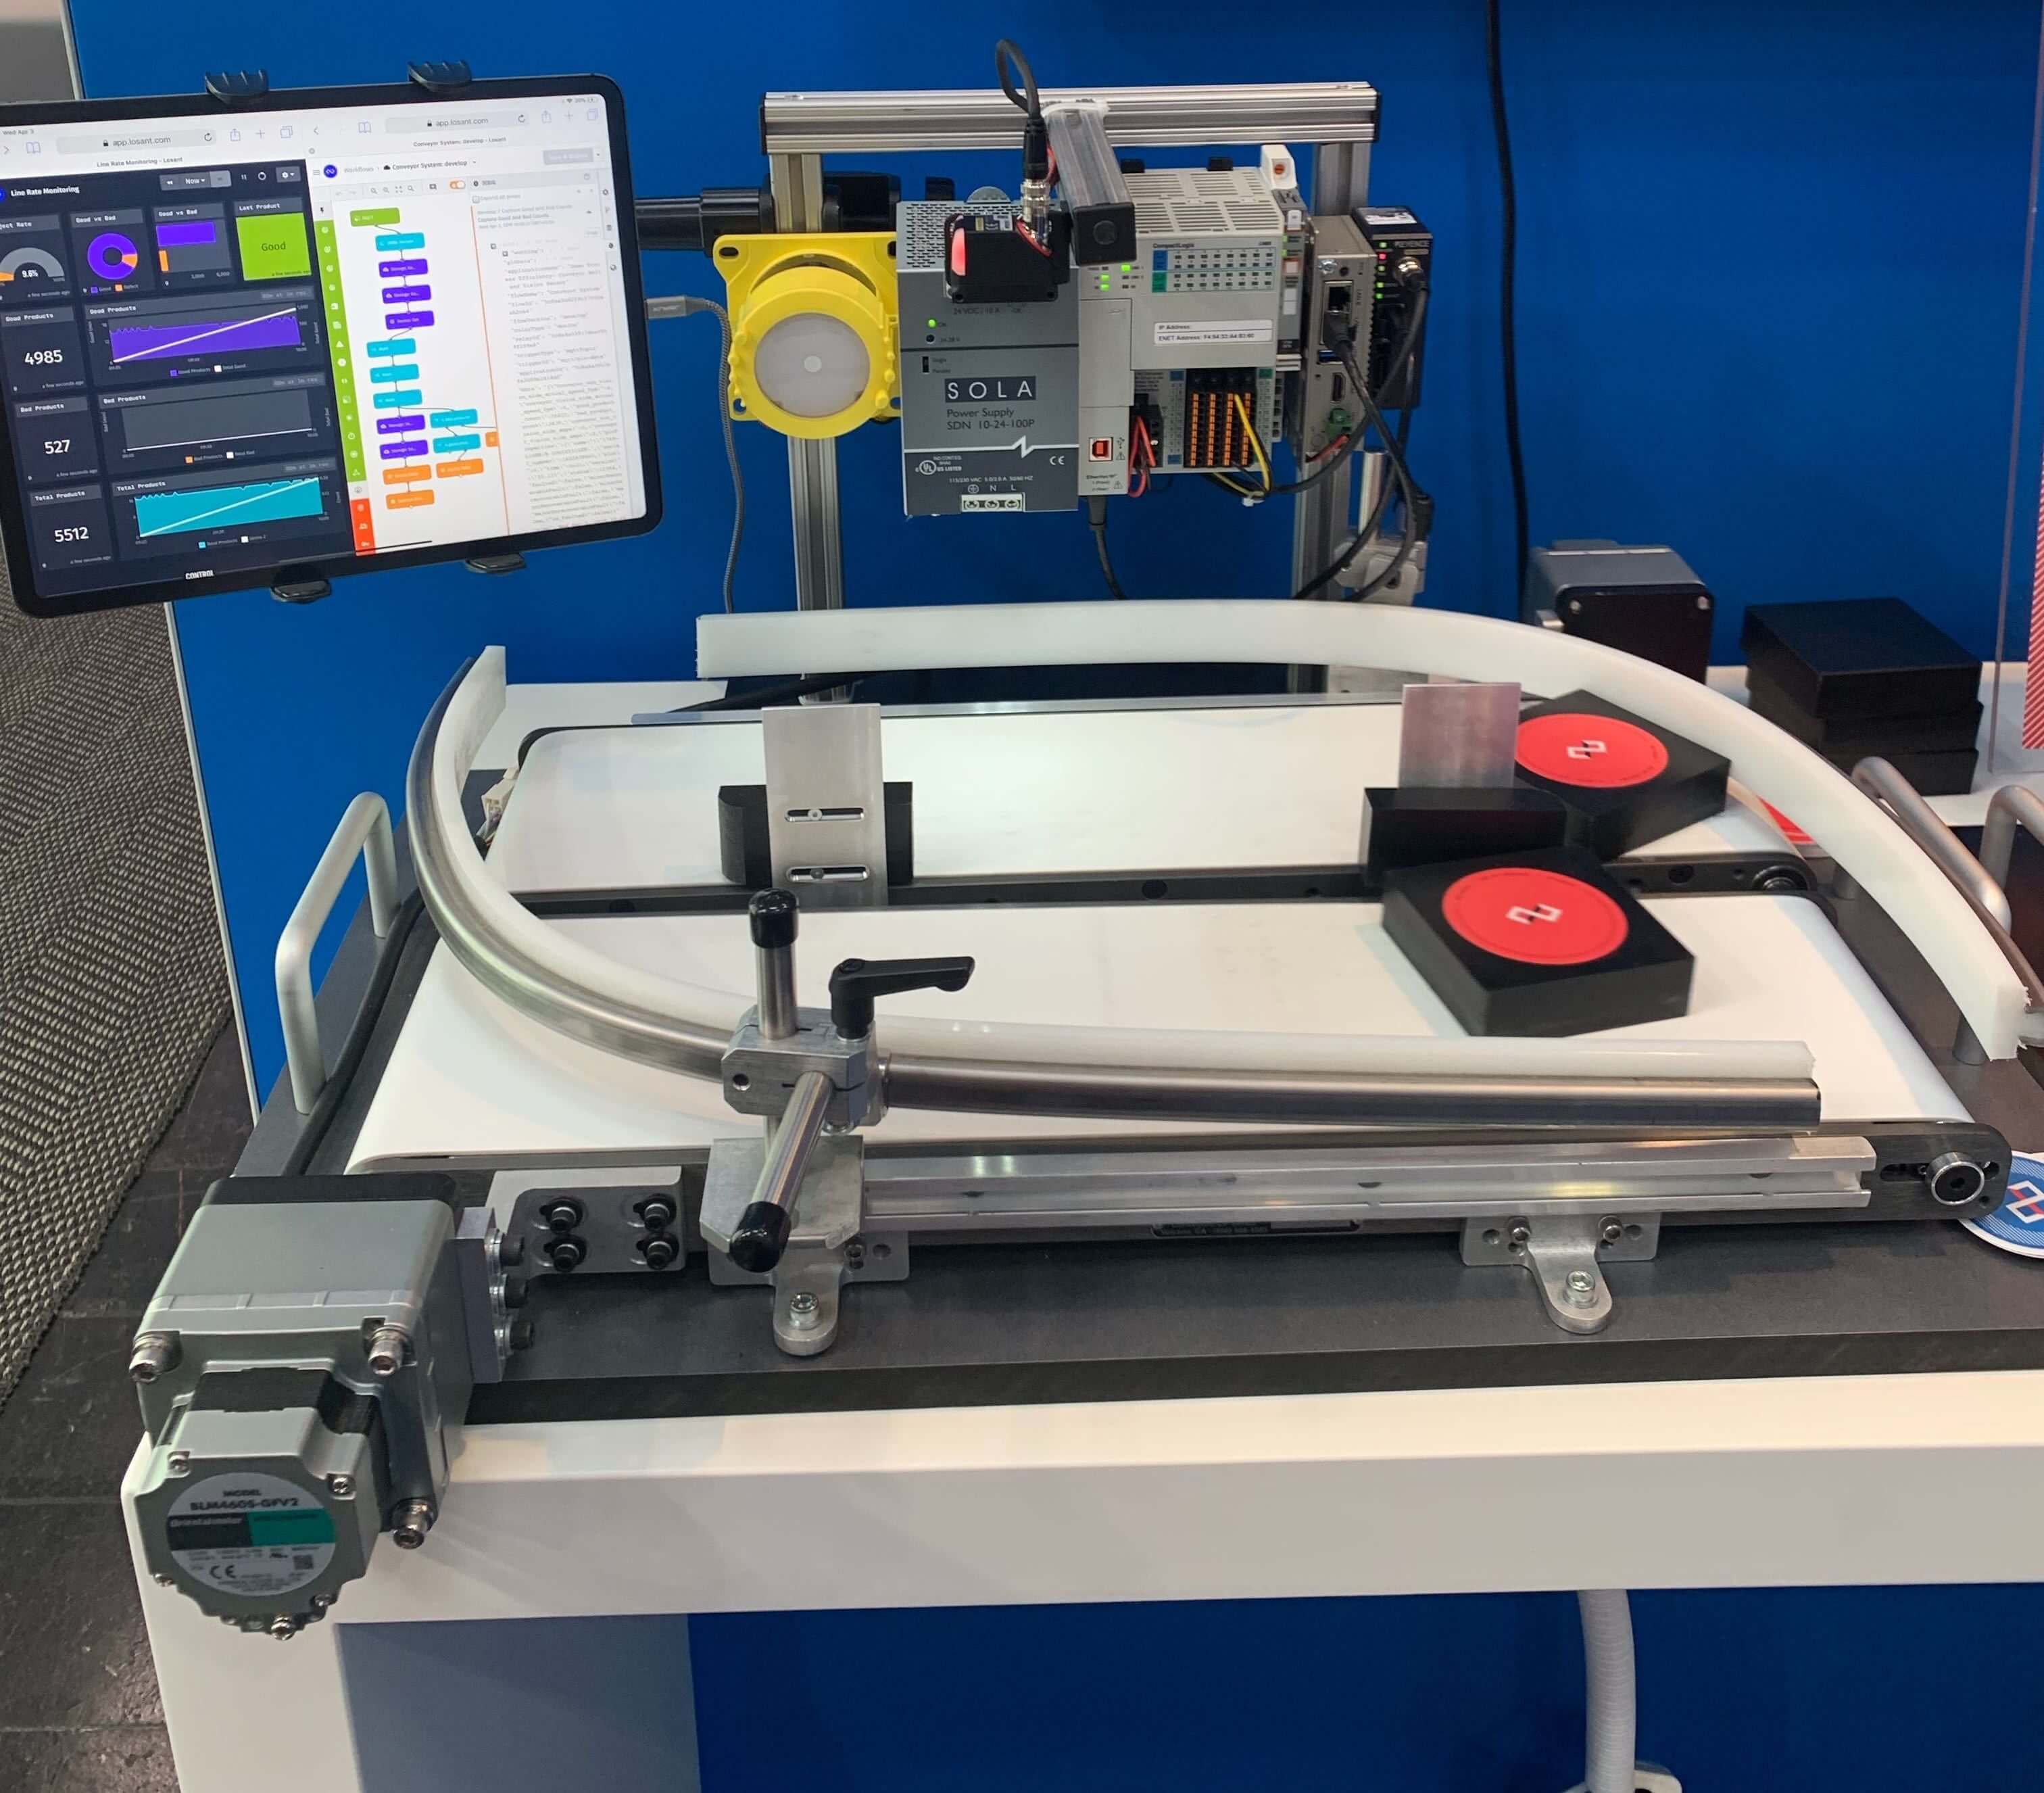 LP Conveyors in IoT Demo at 2019 Hannover Fair